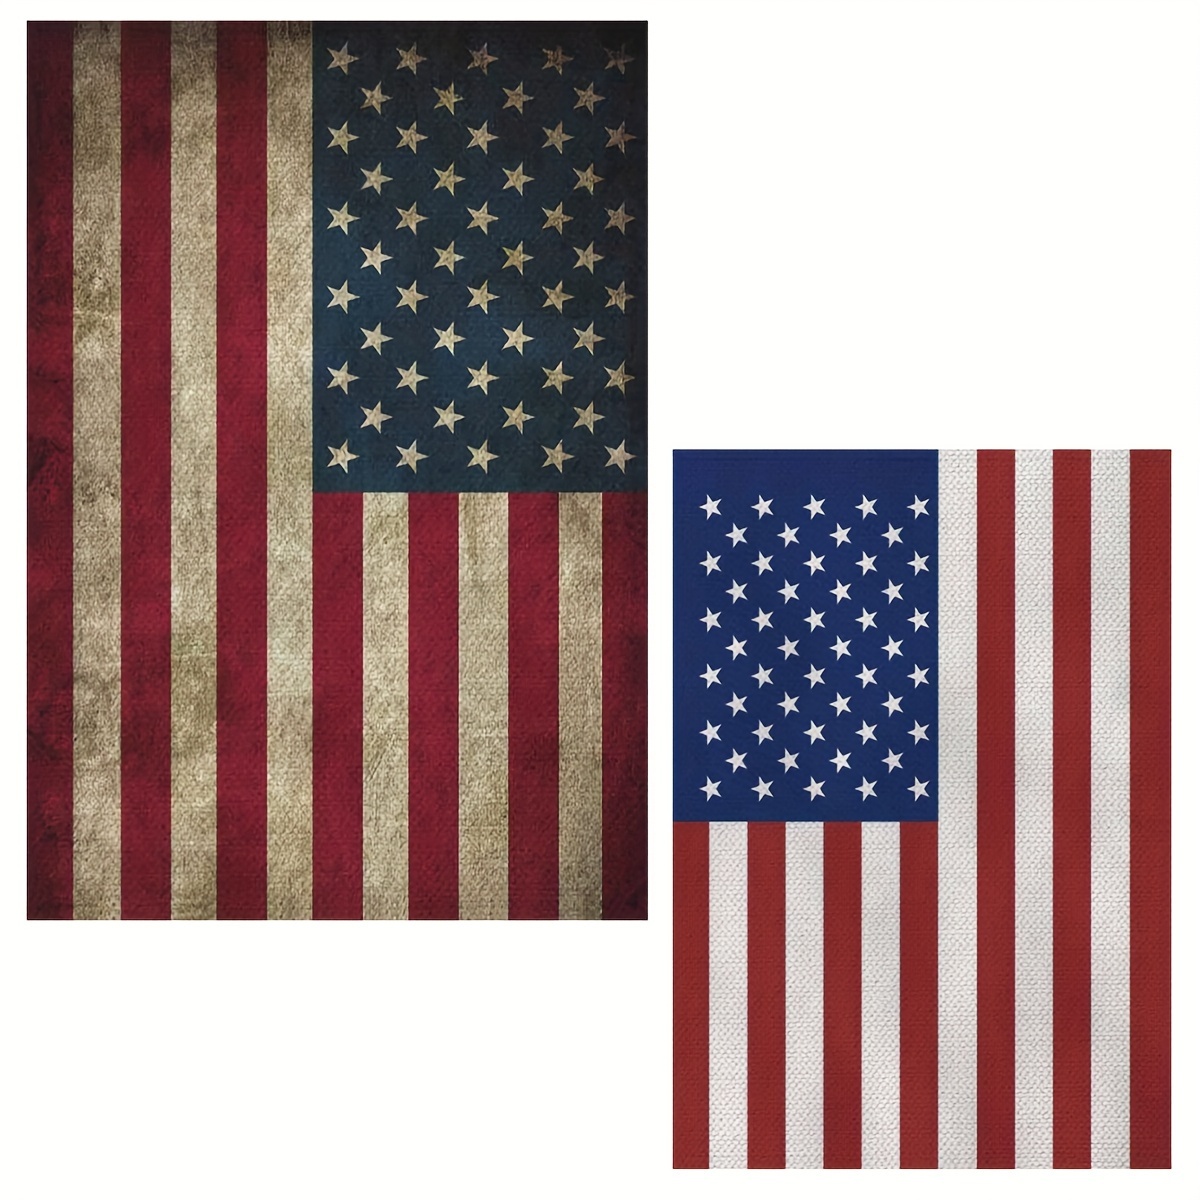 90*150cm Outdoor USA Flag US Waterproof Nylon Embroidered Stars